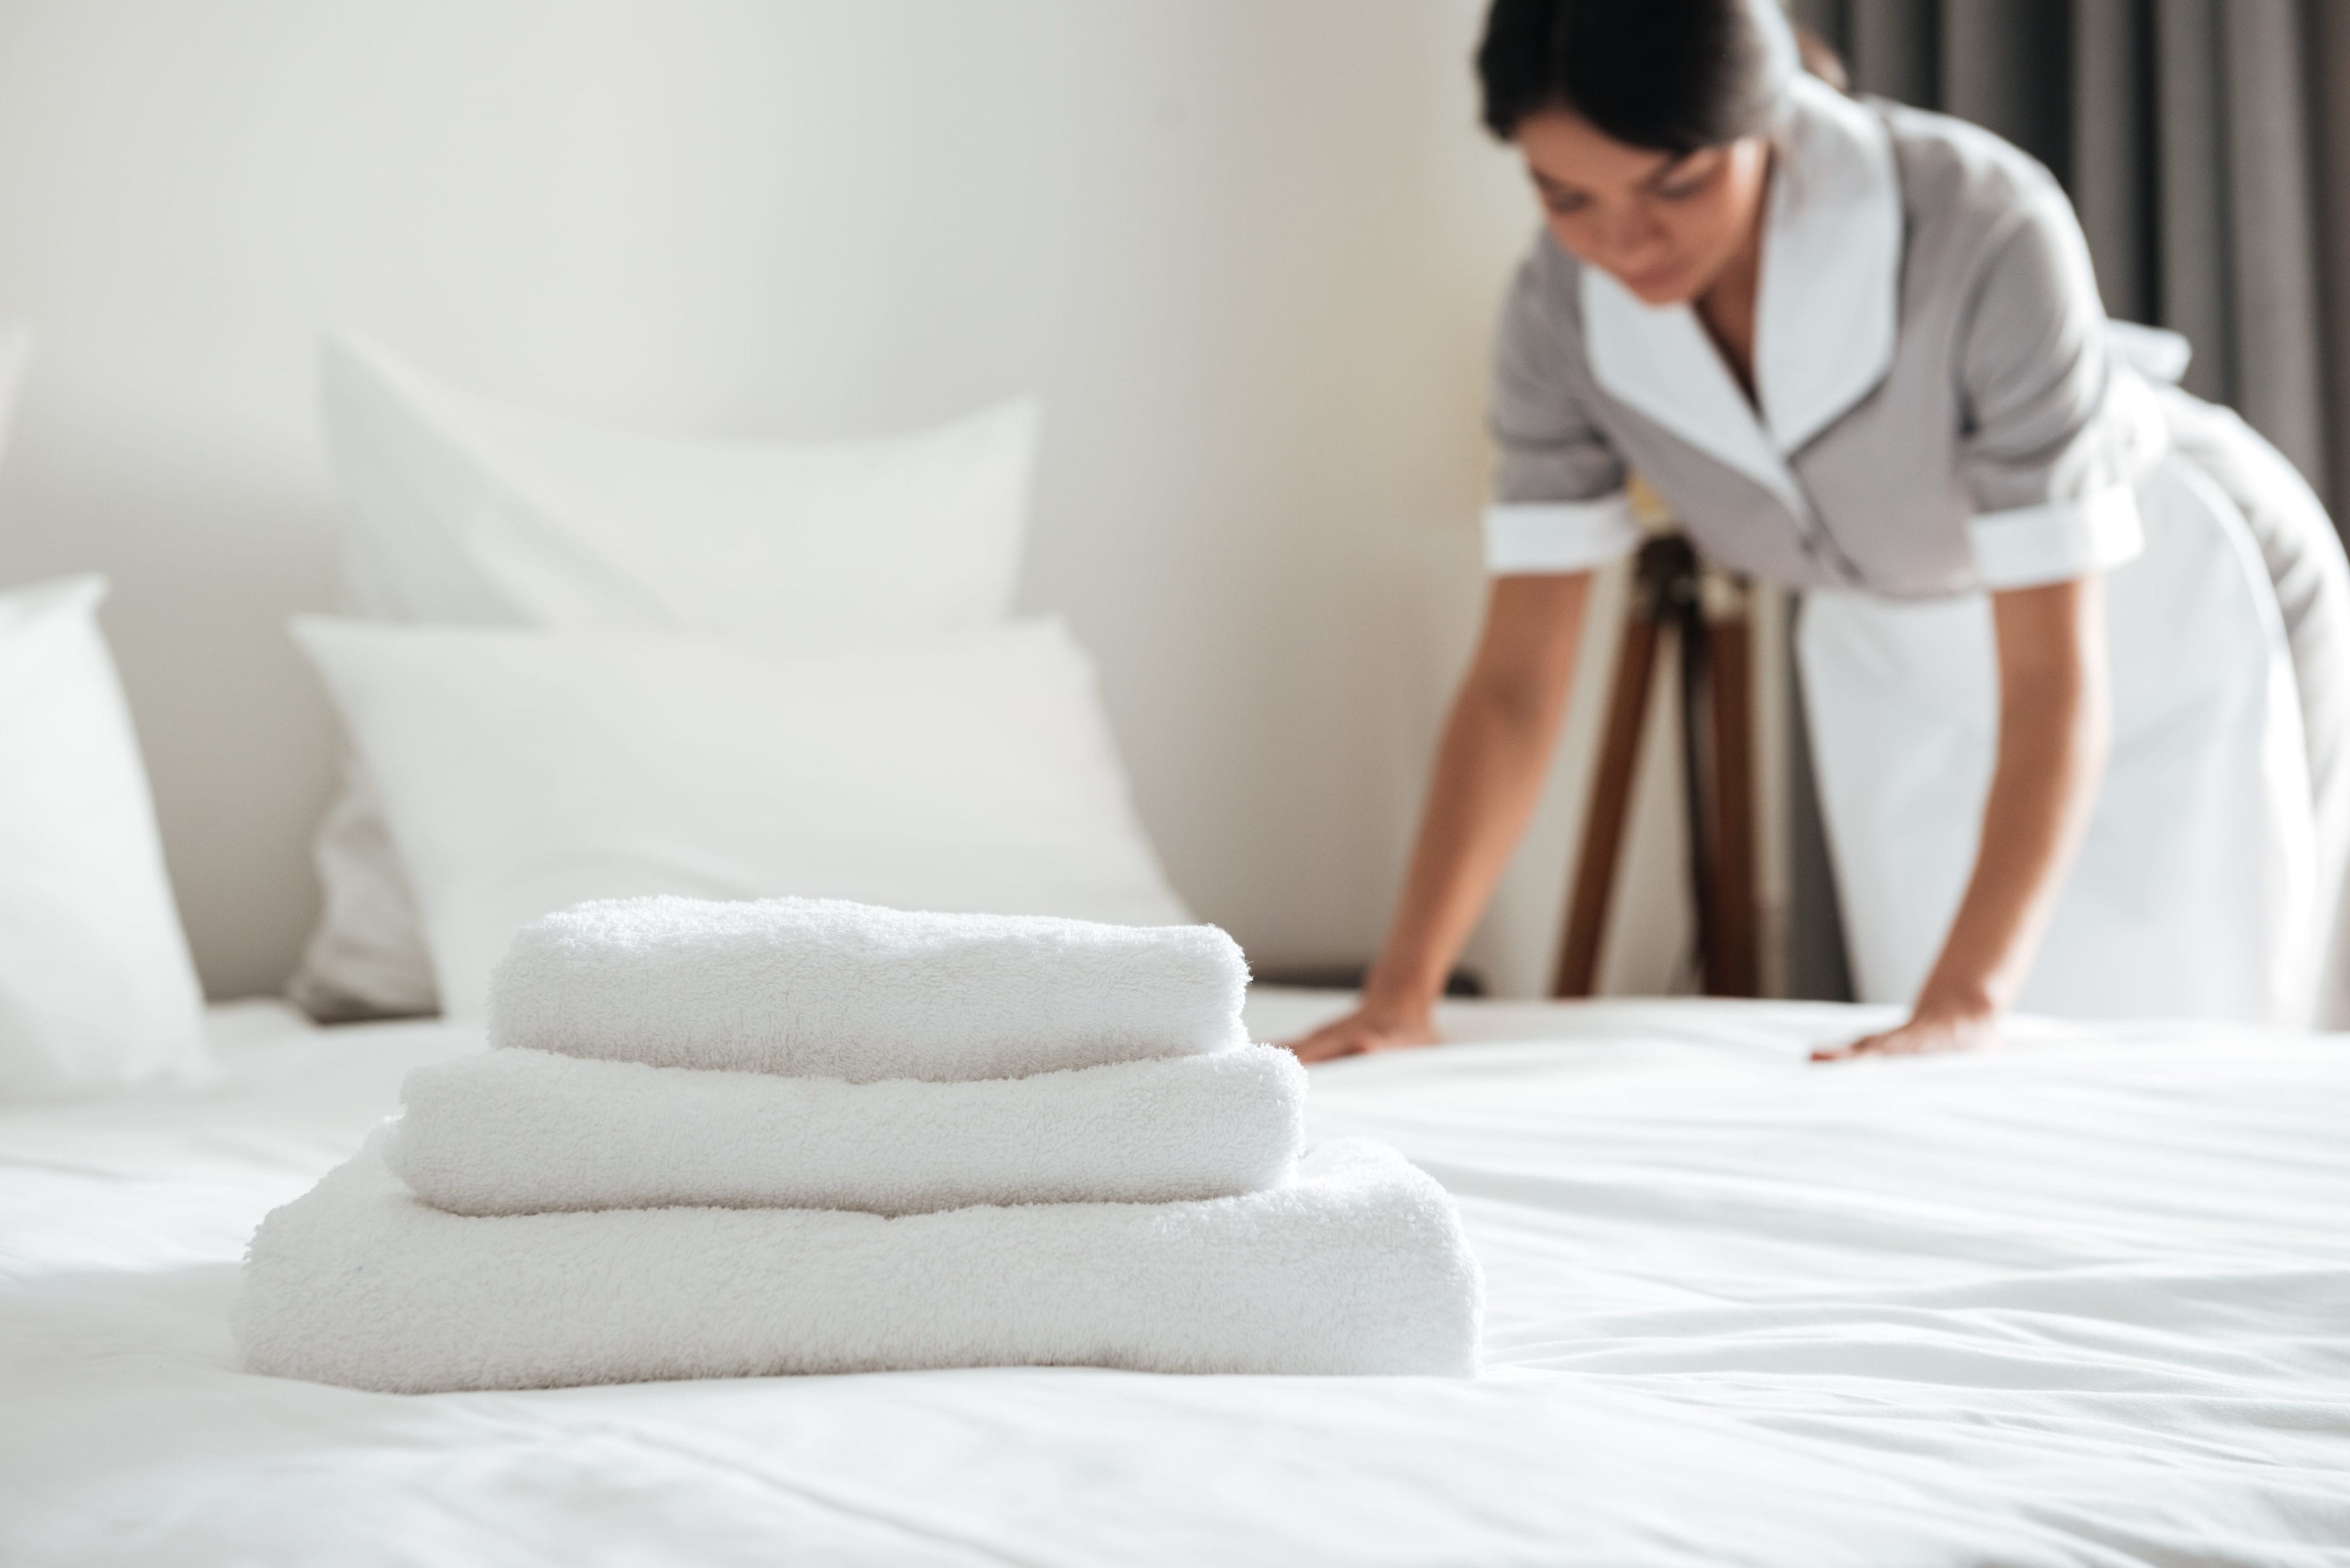 7 Key Operational Areas Of Hotel Management